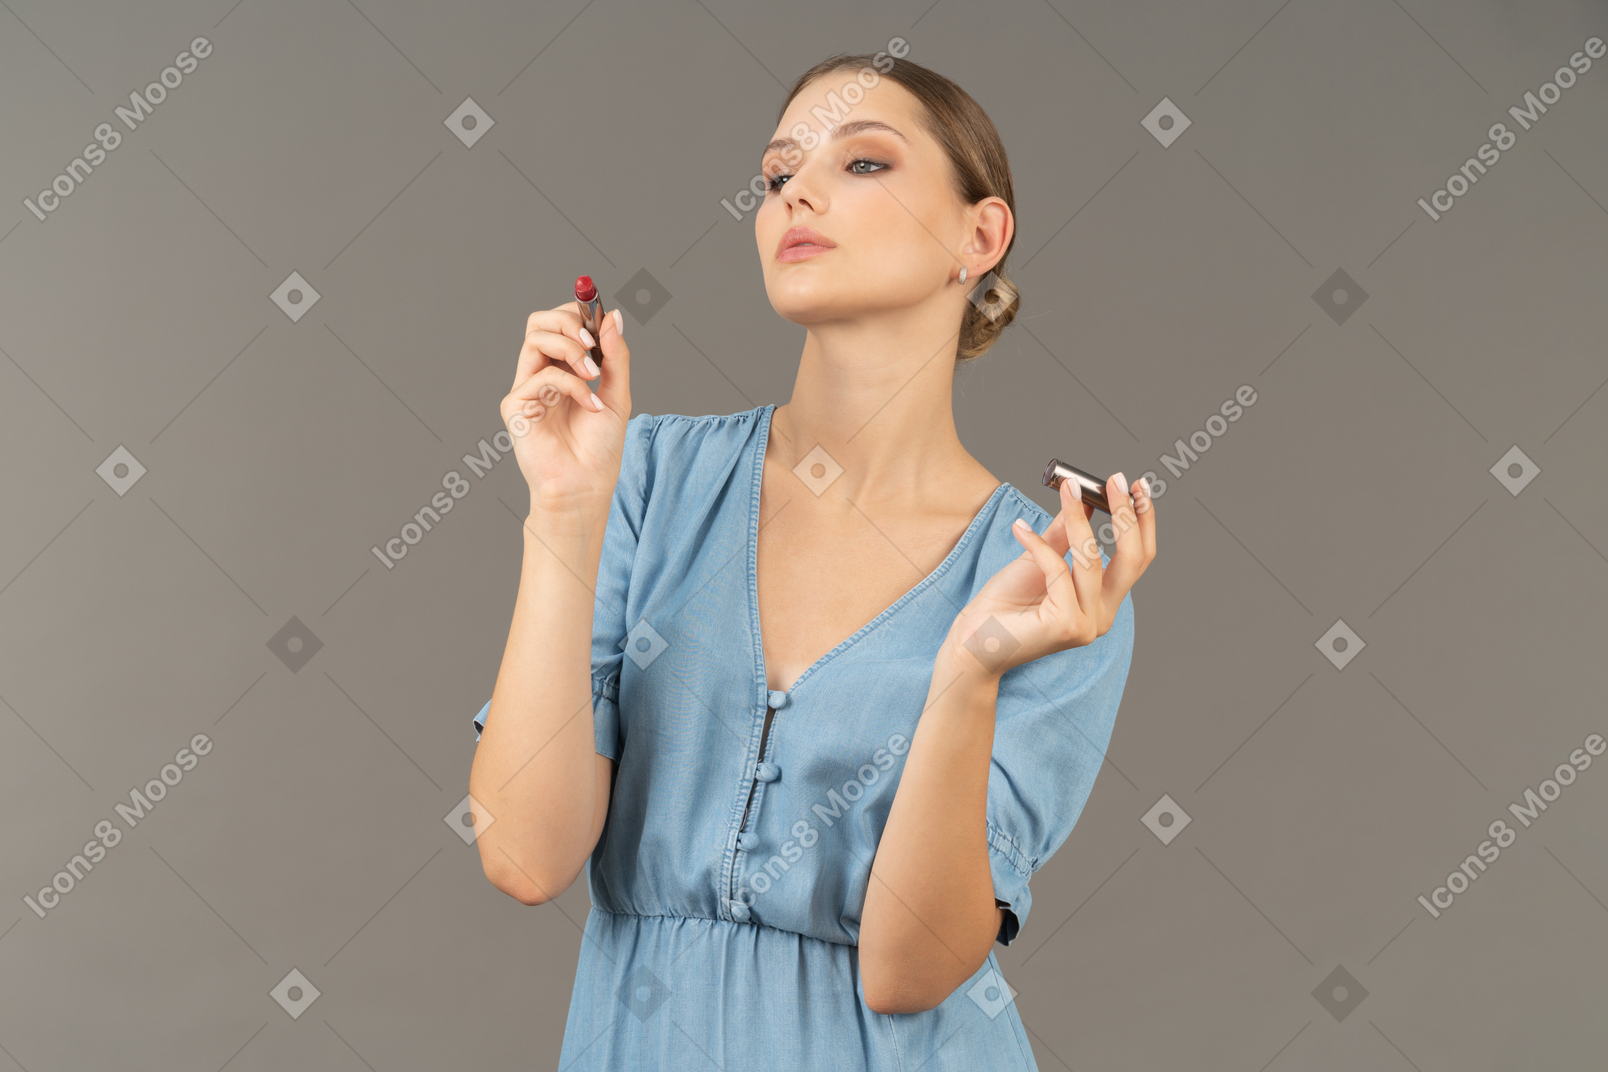 Front view of a young woman in blue dress holding a lipstick